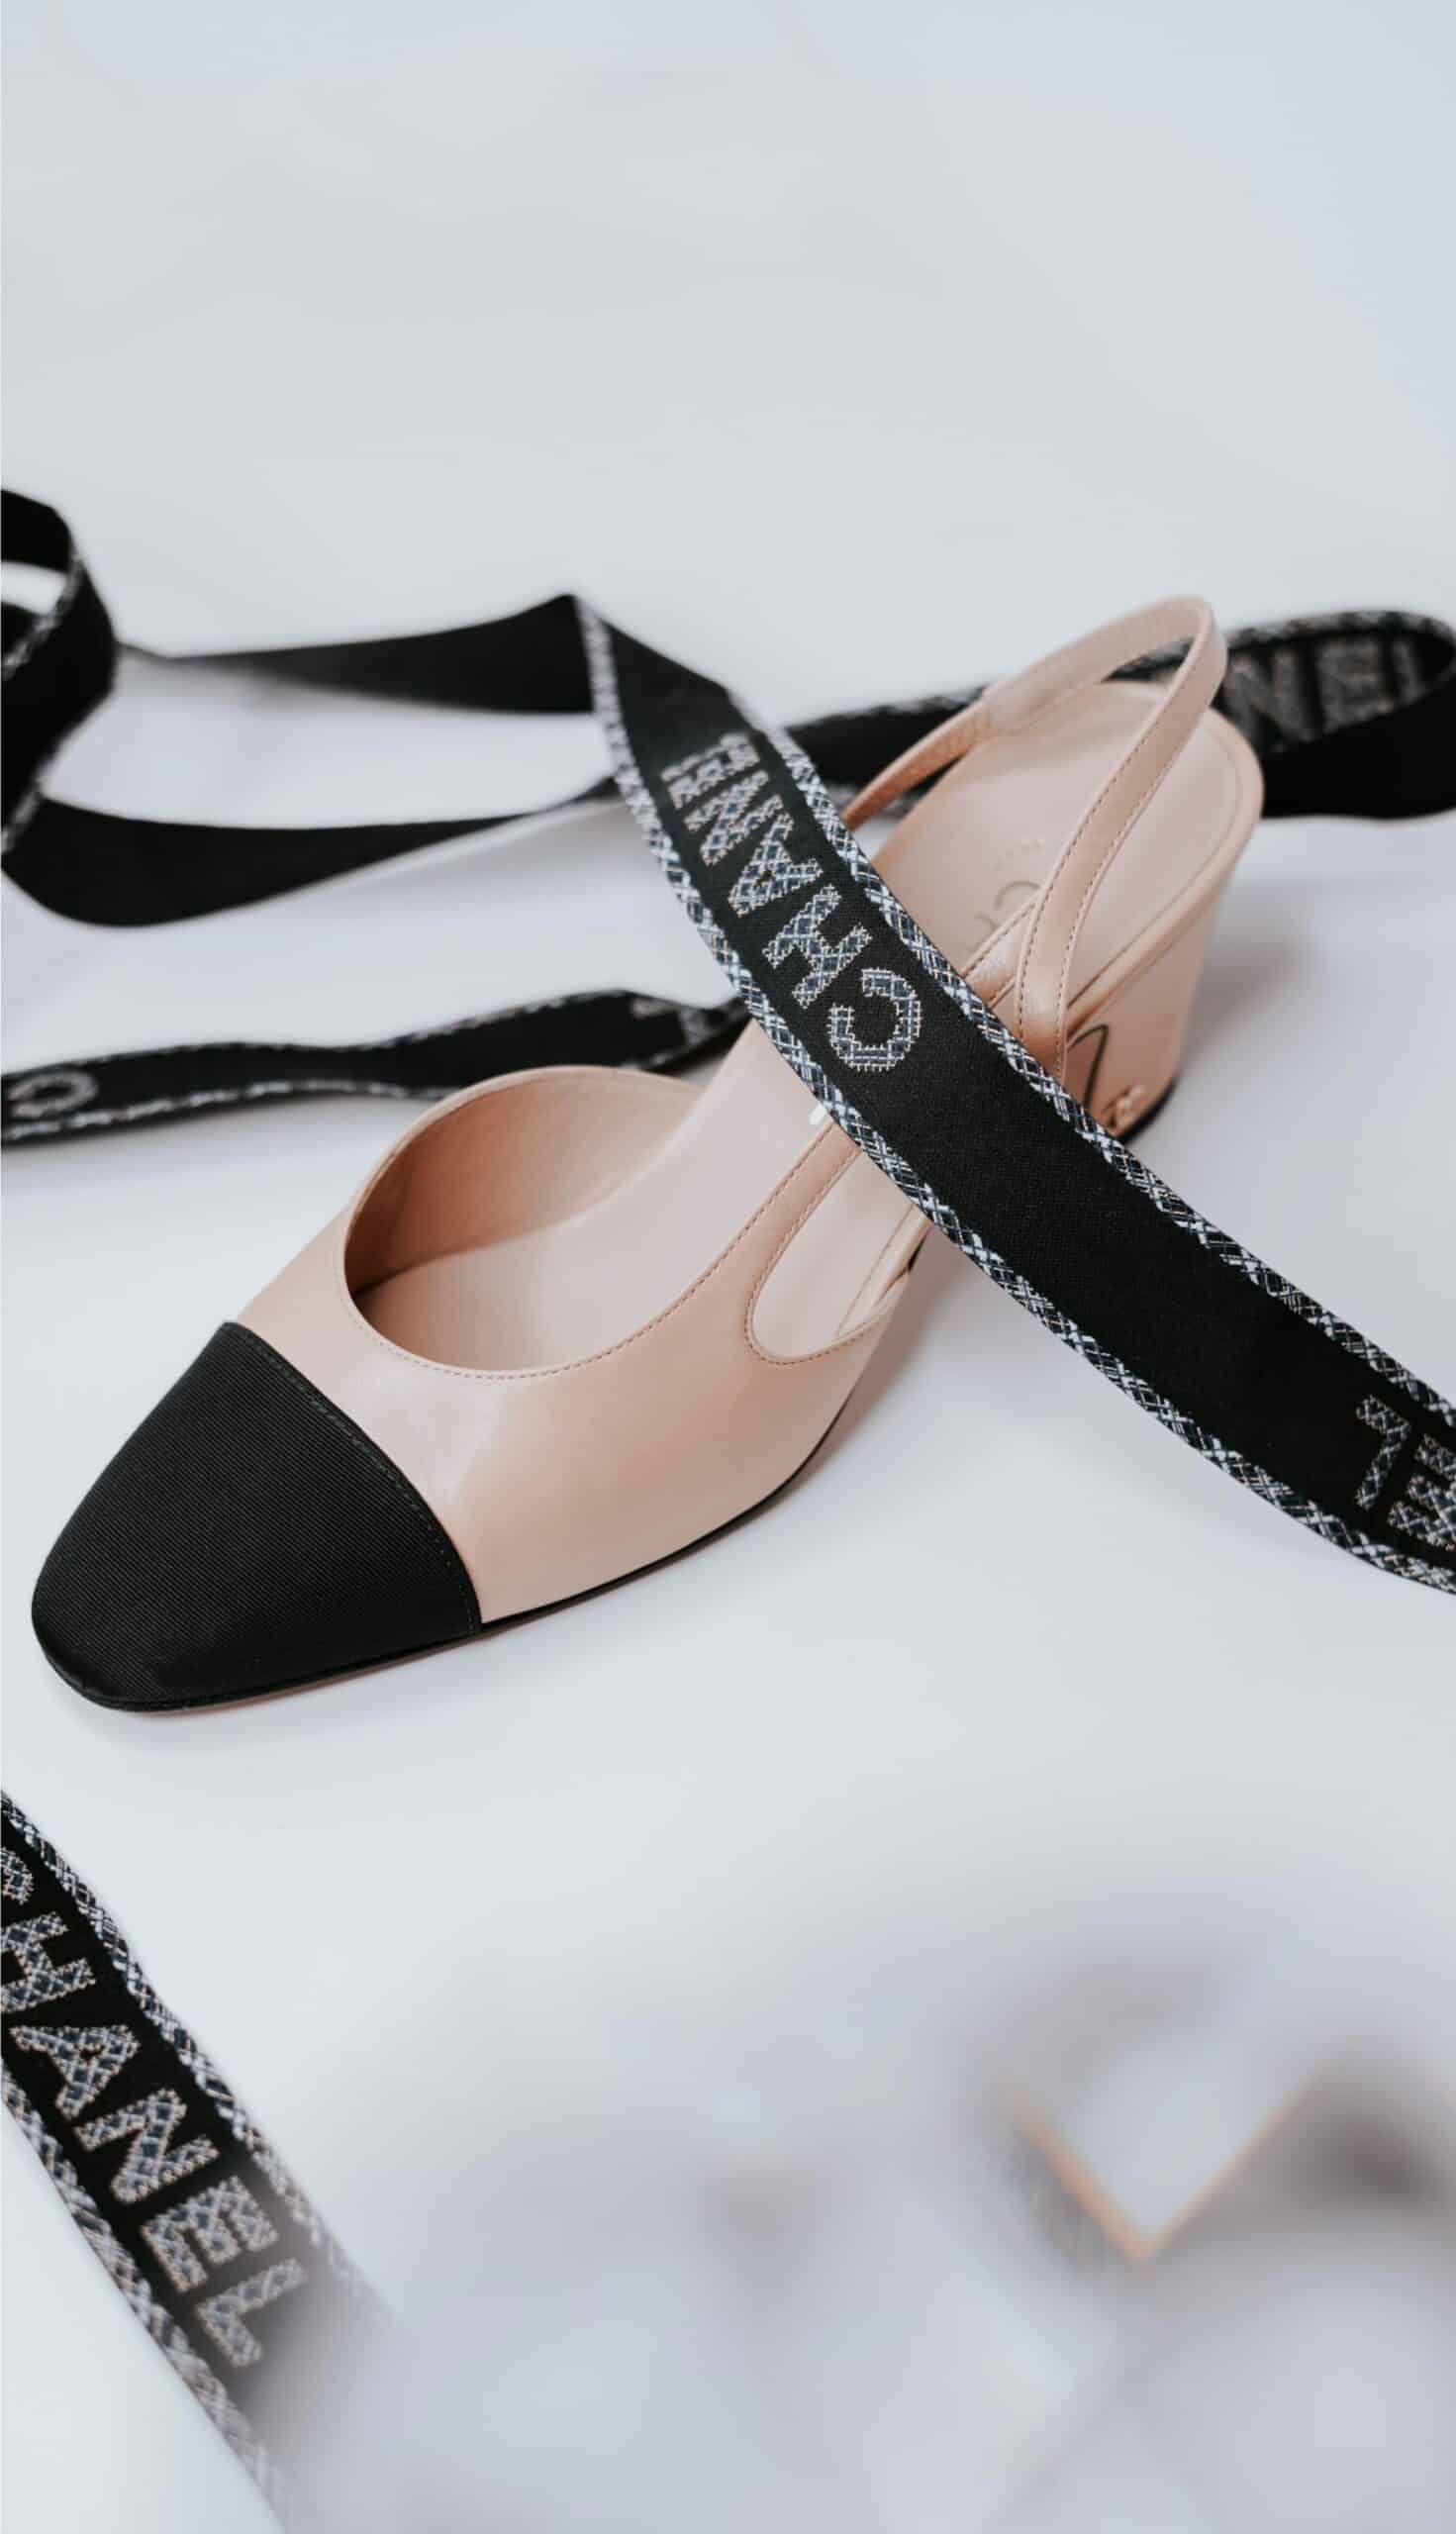 6 GORGEOUS Chanel Slingback Dupes You'll Love